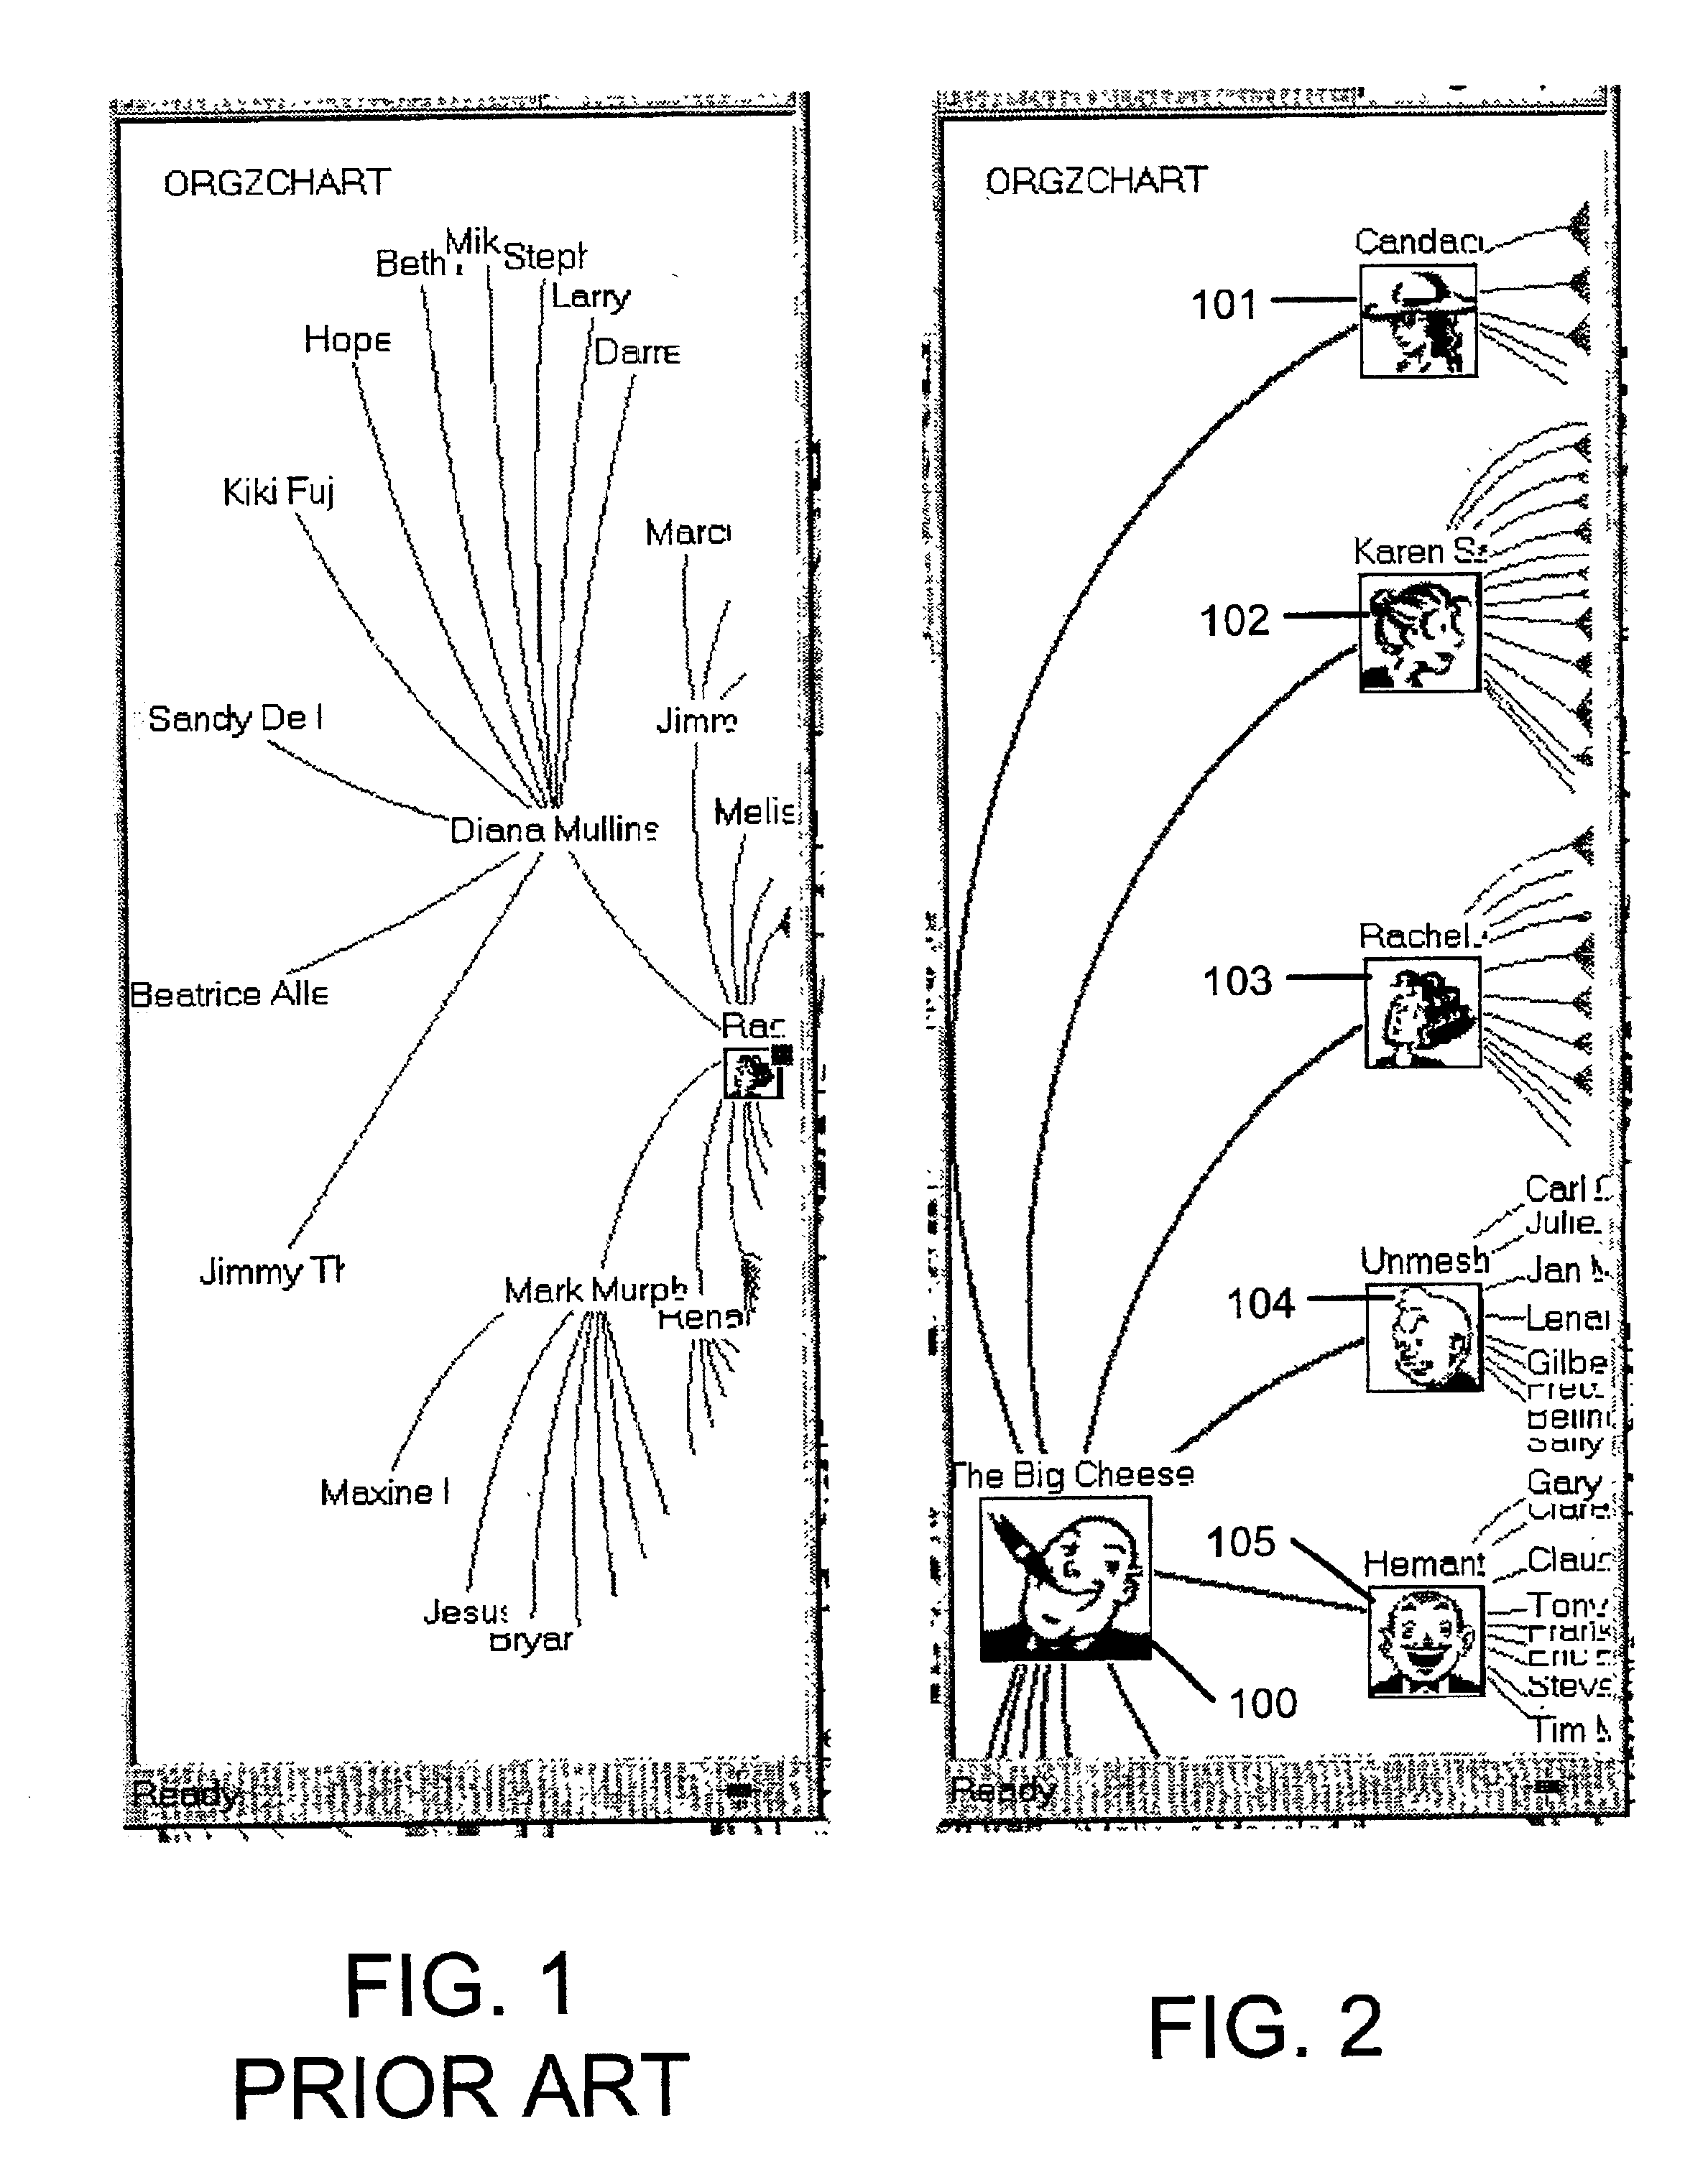 Tree visualization system and method based upon a compressed half-plane model of hyperbolic geometry